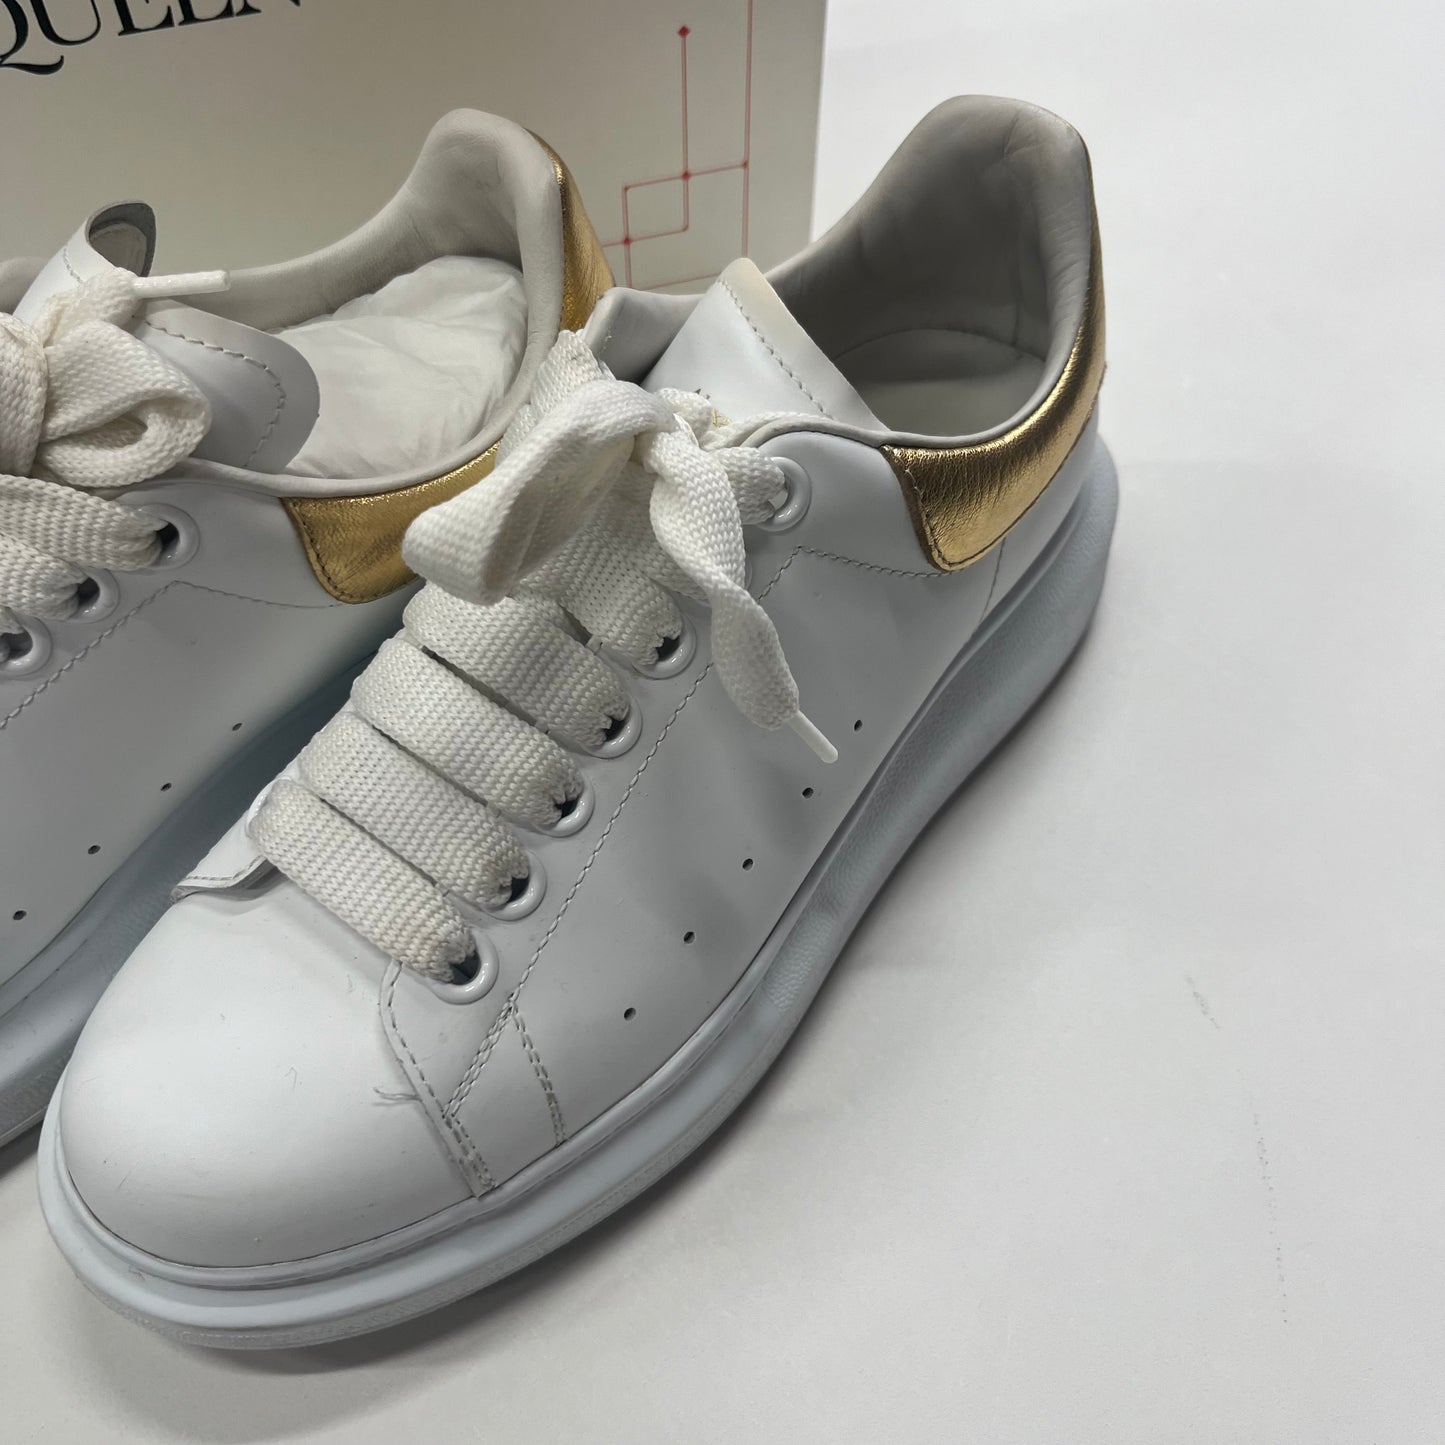 White Shoes Athletic Alexander Mcqueen, Size 7